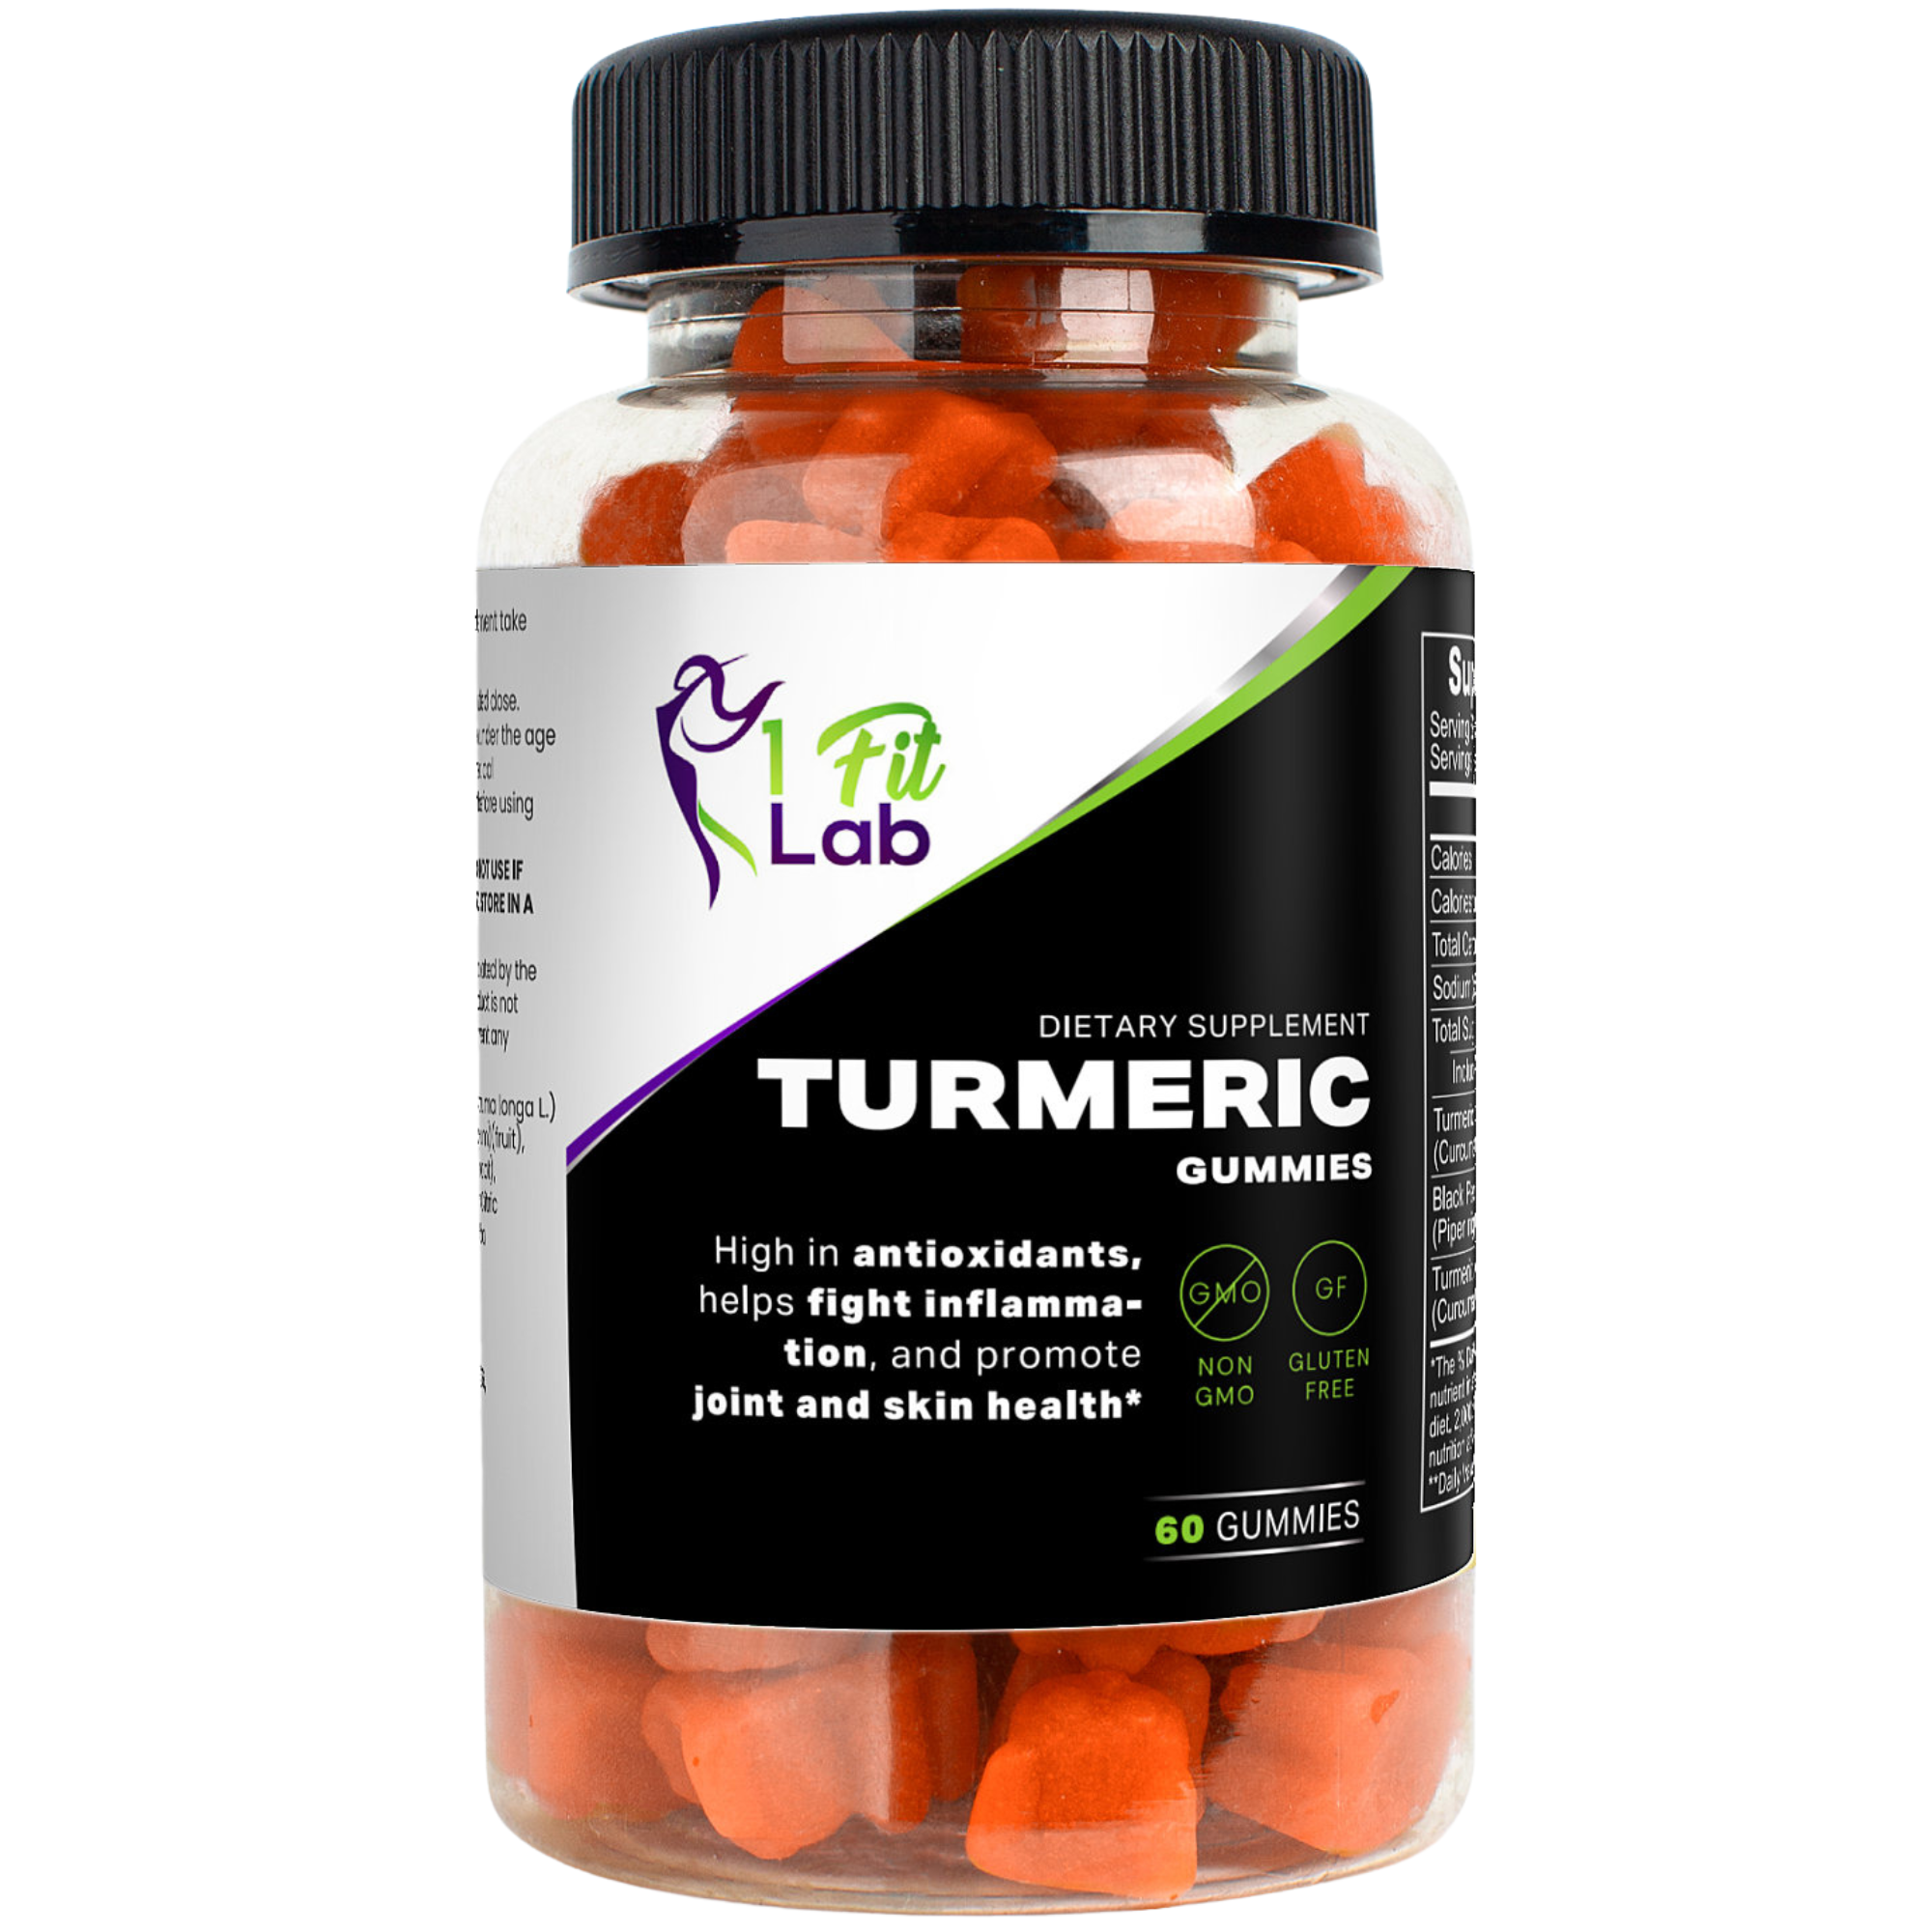 Bottle of Turmeric Gummies for antioxidant and immune support